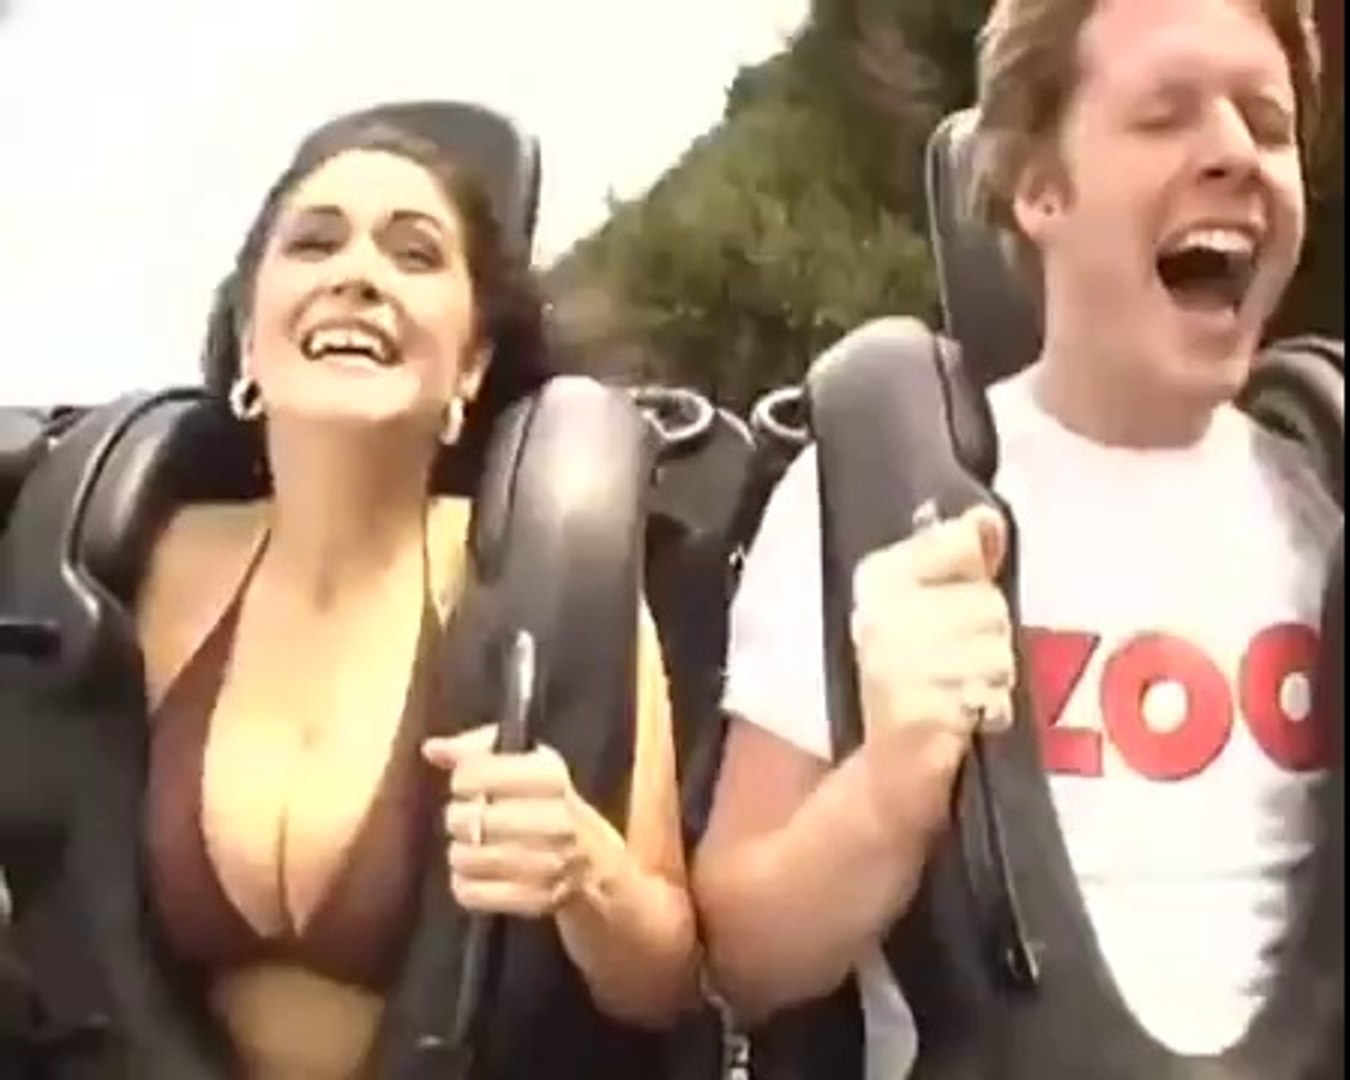 Tits out on sling shot - 🧡 Hot Baby With Big Boobs Riding On Slingshot Wi....